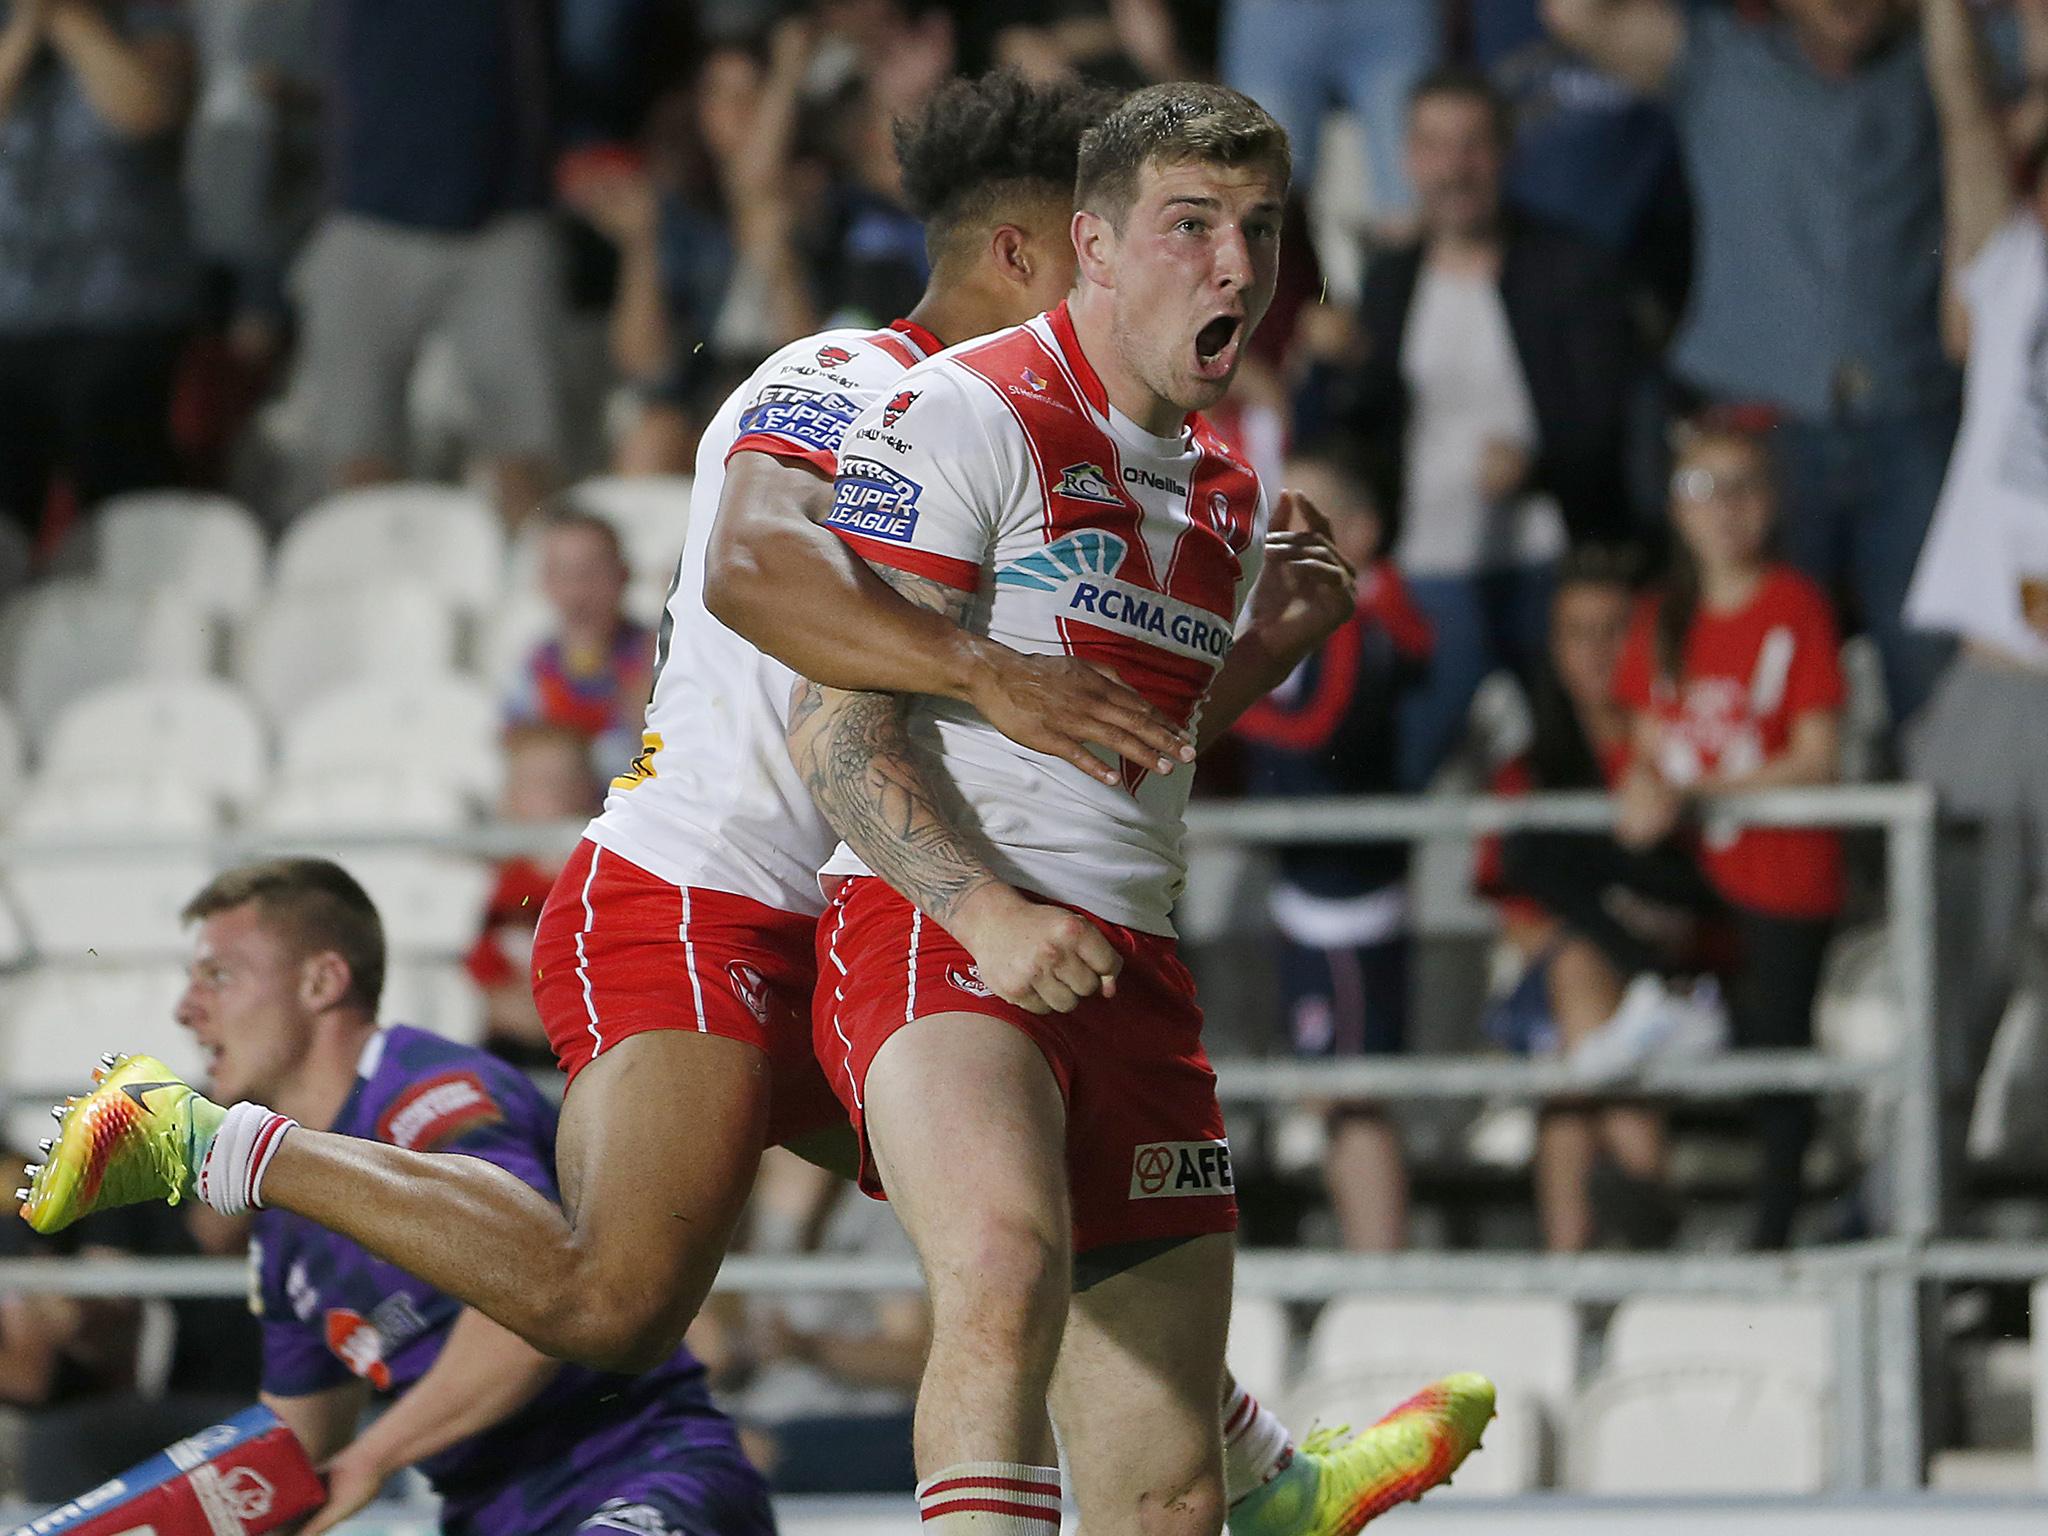 Mark Percival's late try completed St Helens comeback after they trailed at half-time